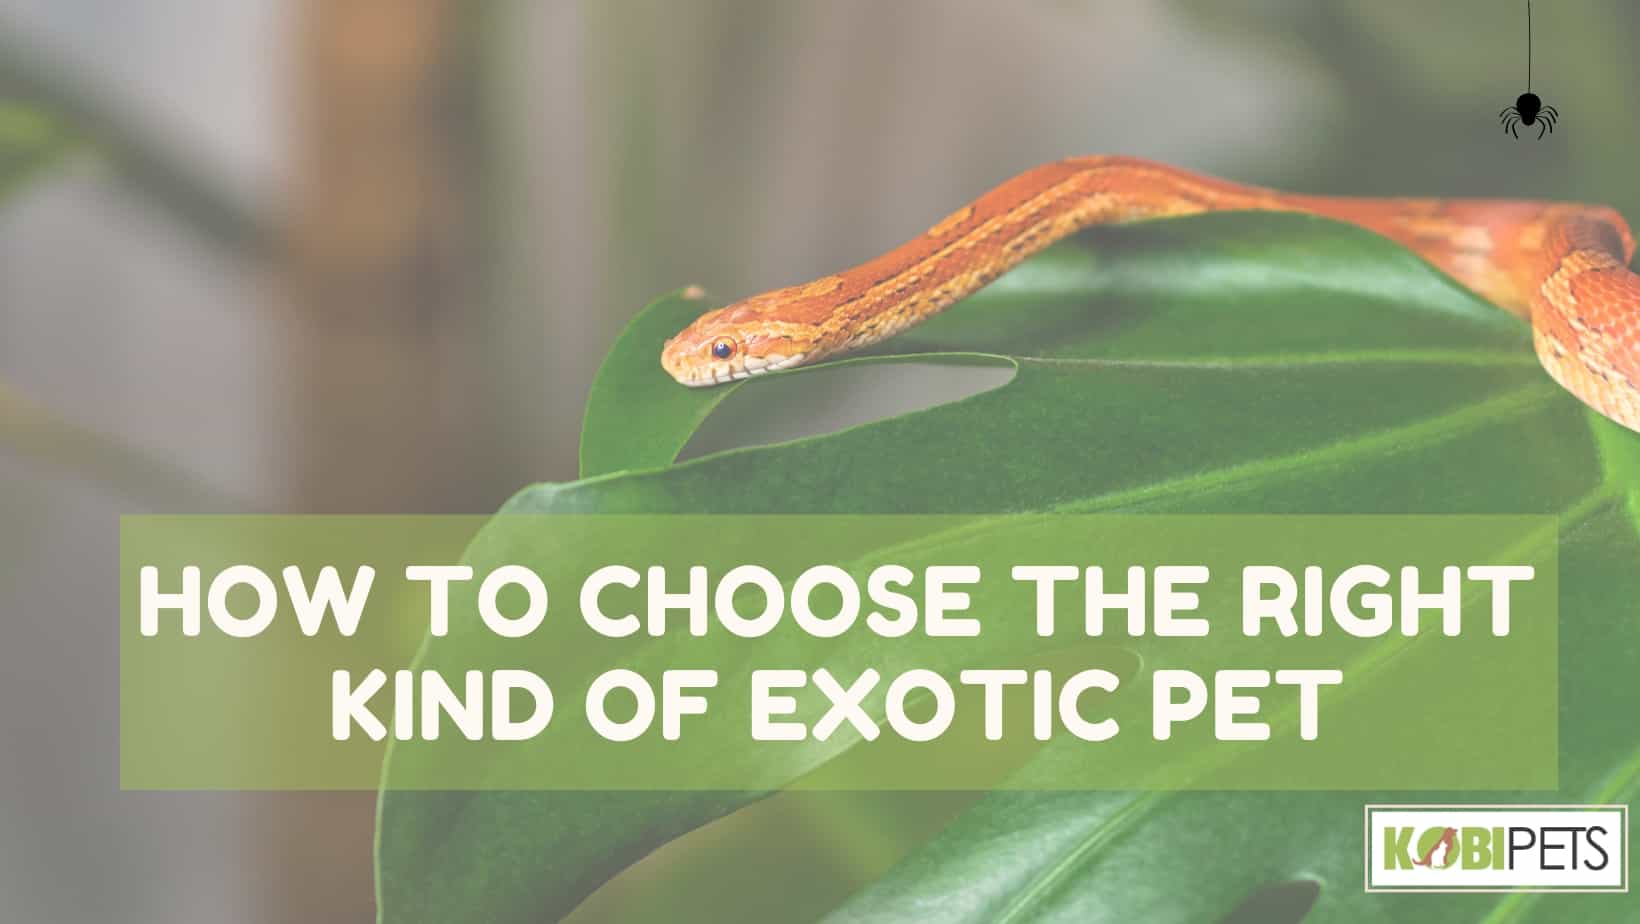 How to Choose the Right Kind of Exotic PetHow to Choose the Right Kind of Exotic Pet